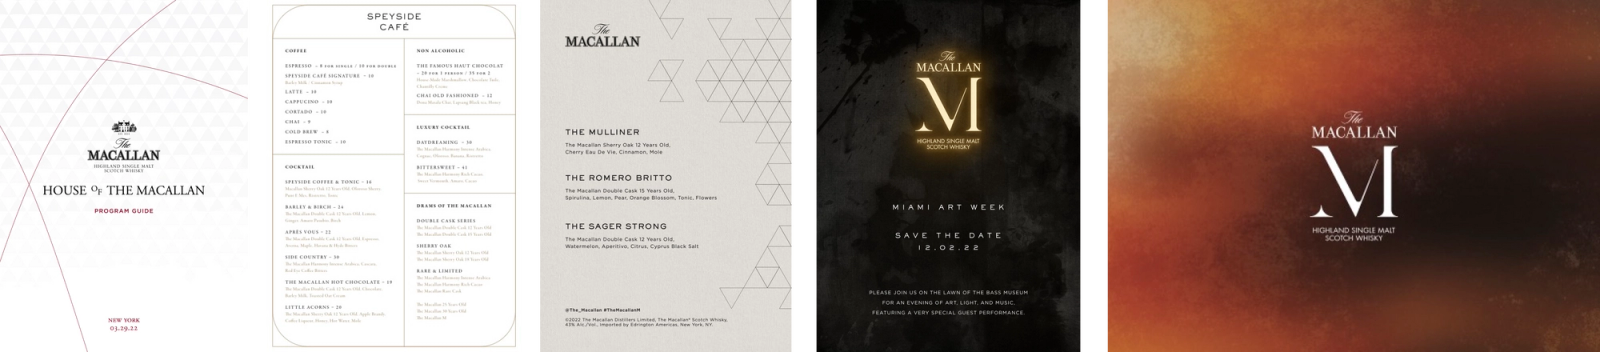 house-of-the-macallan-program-guide 